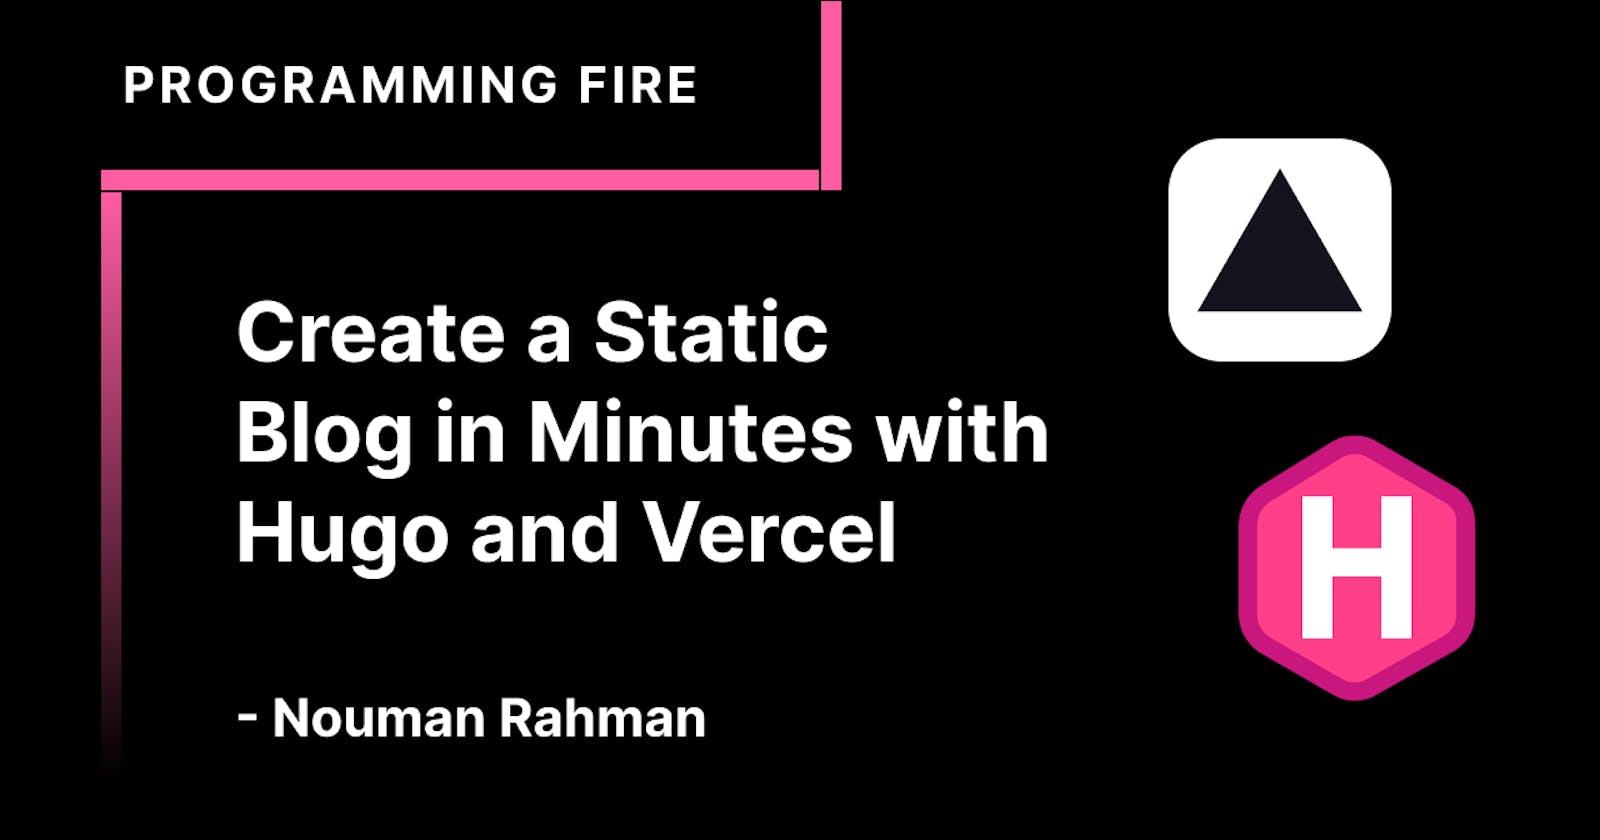 Create a Static Blog in Minutes with Hugo and Vercel